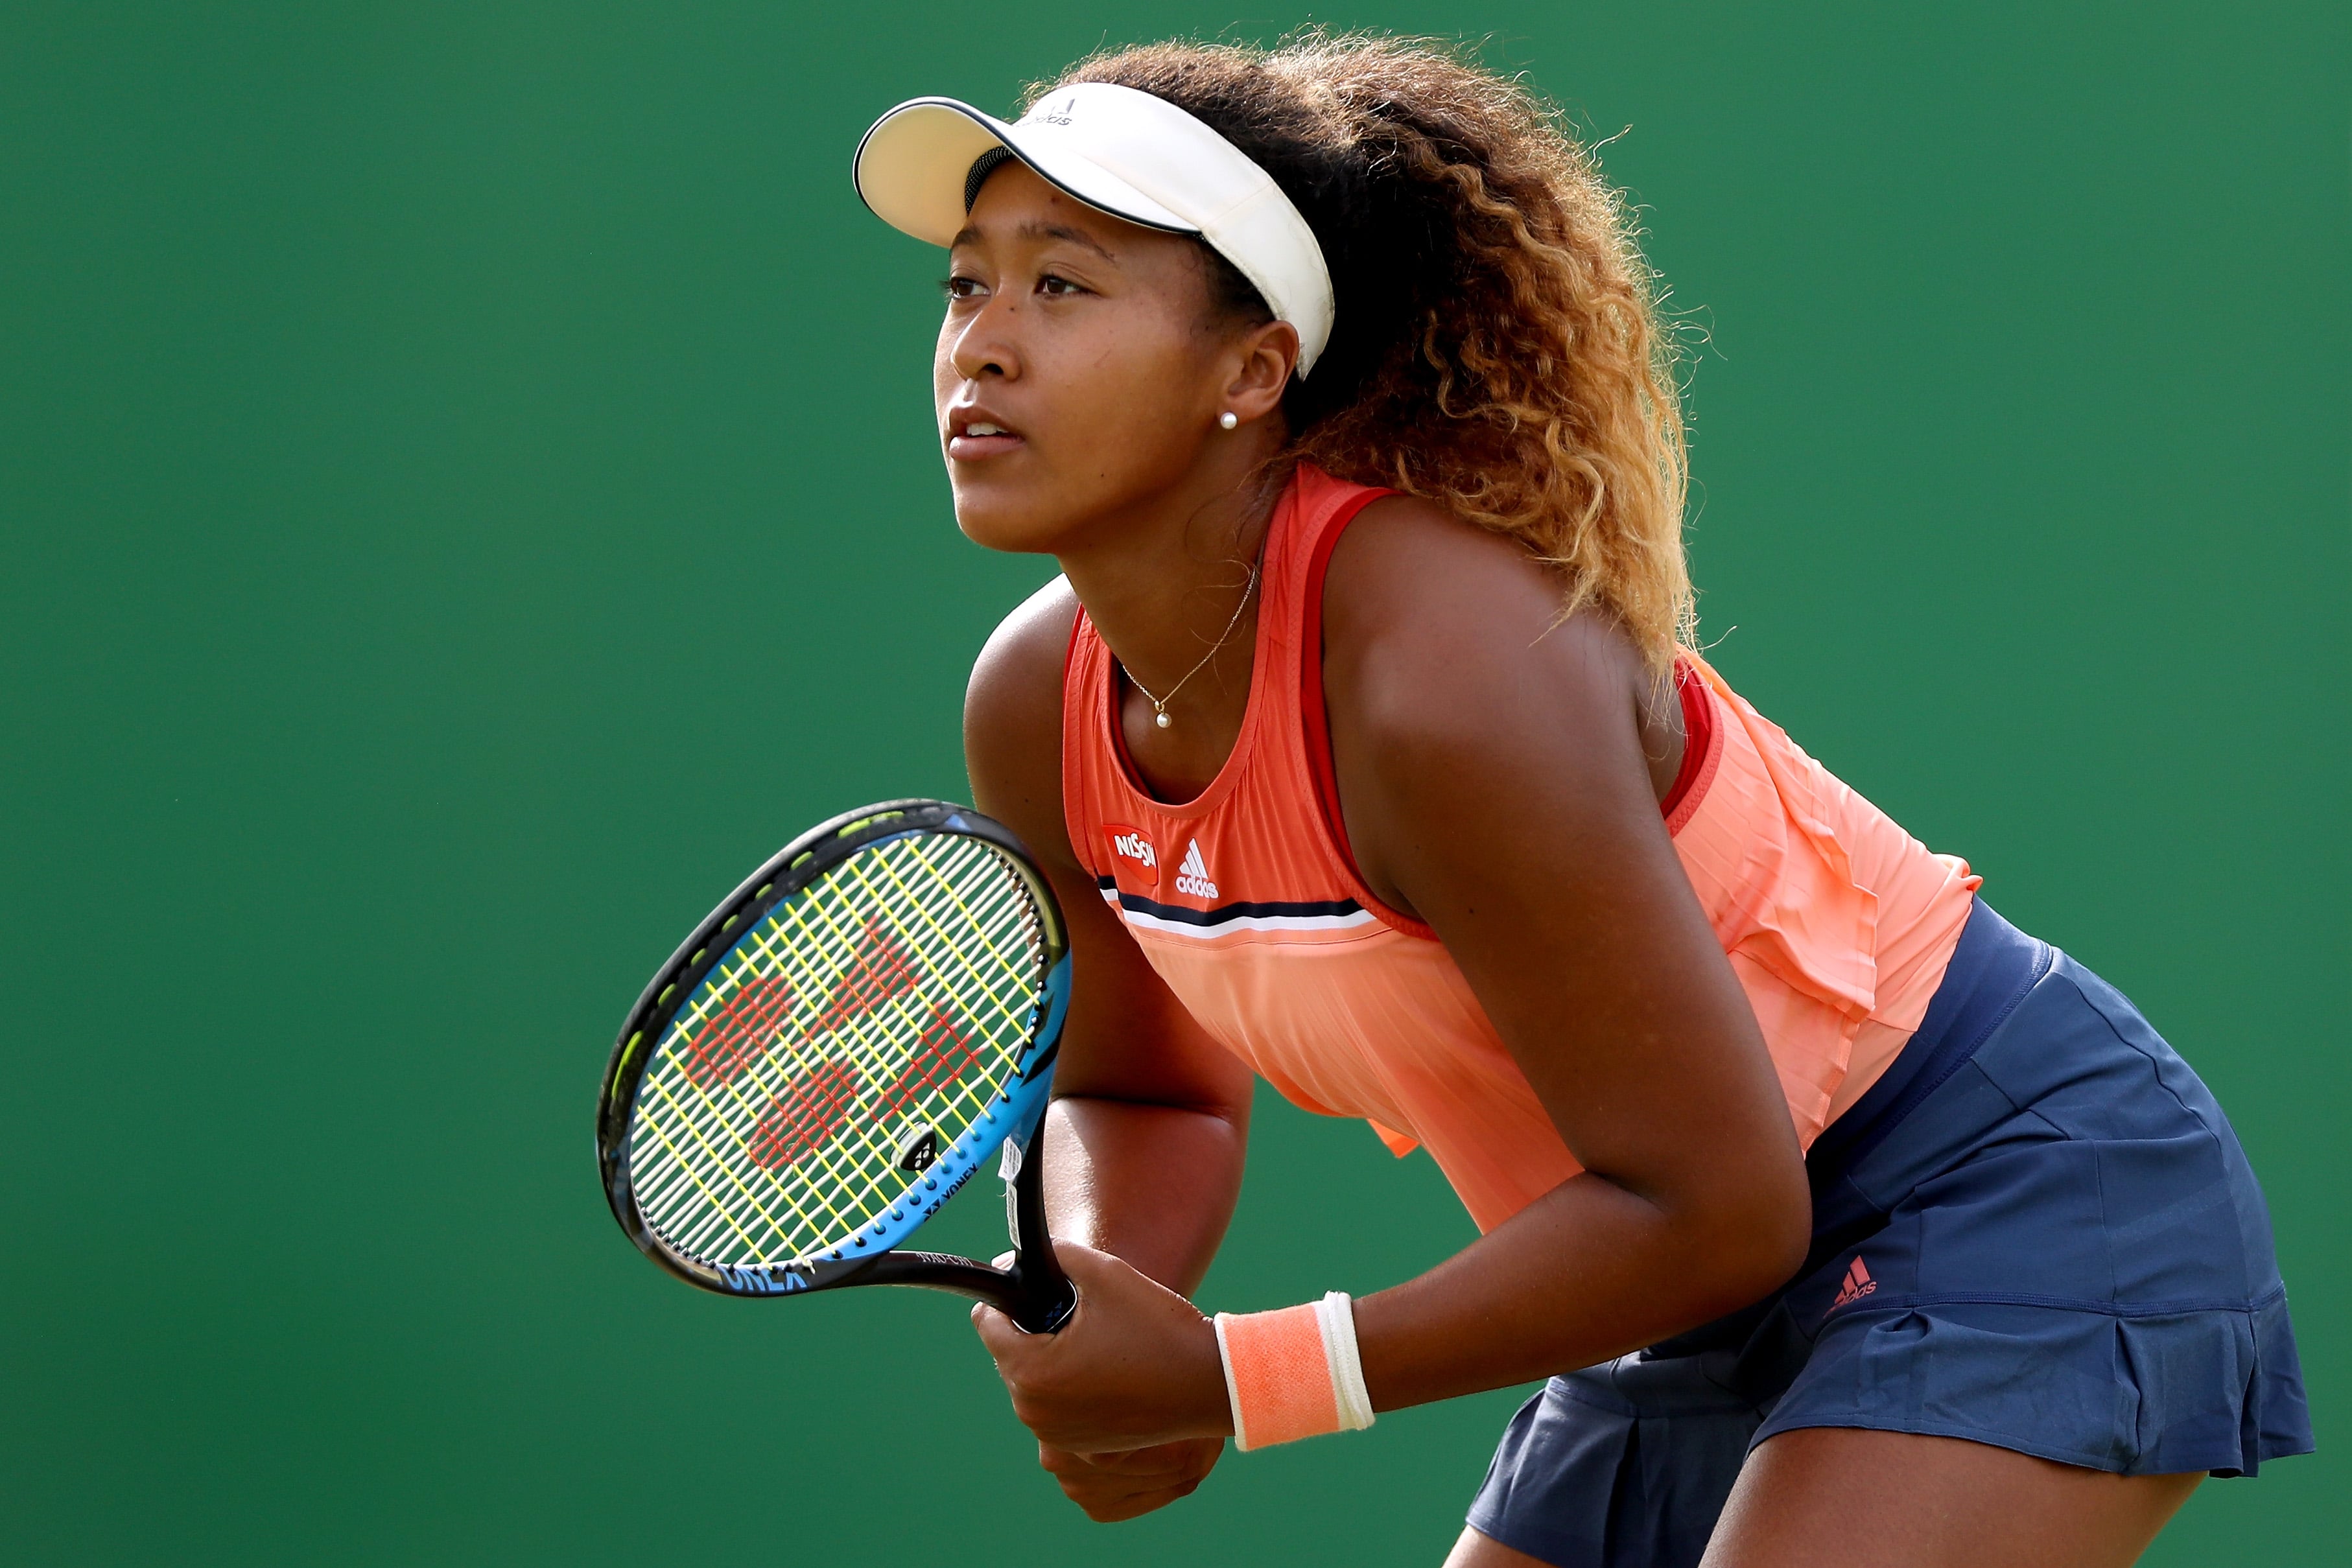 Naomi Osaka Knocked Out of Tokyo Olympics in Her Home Country 